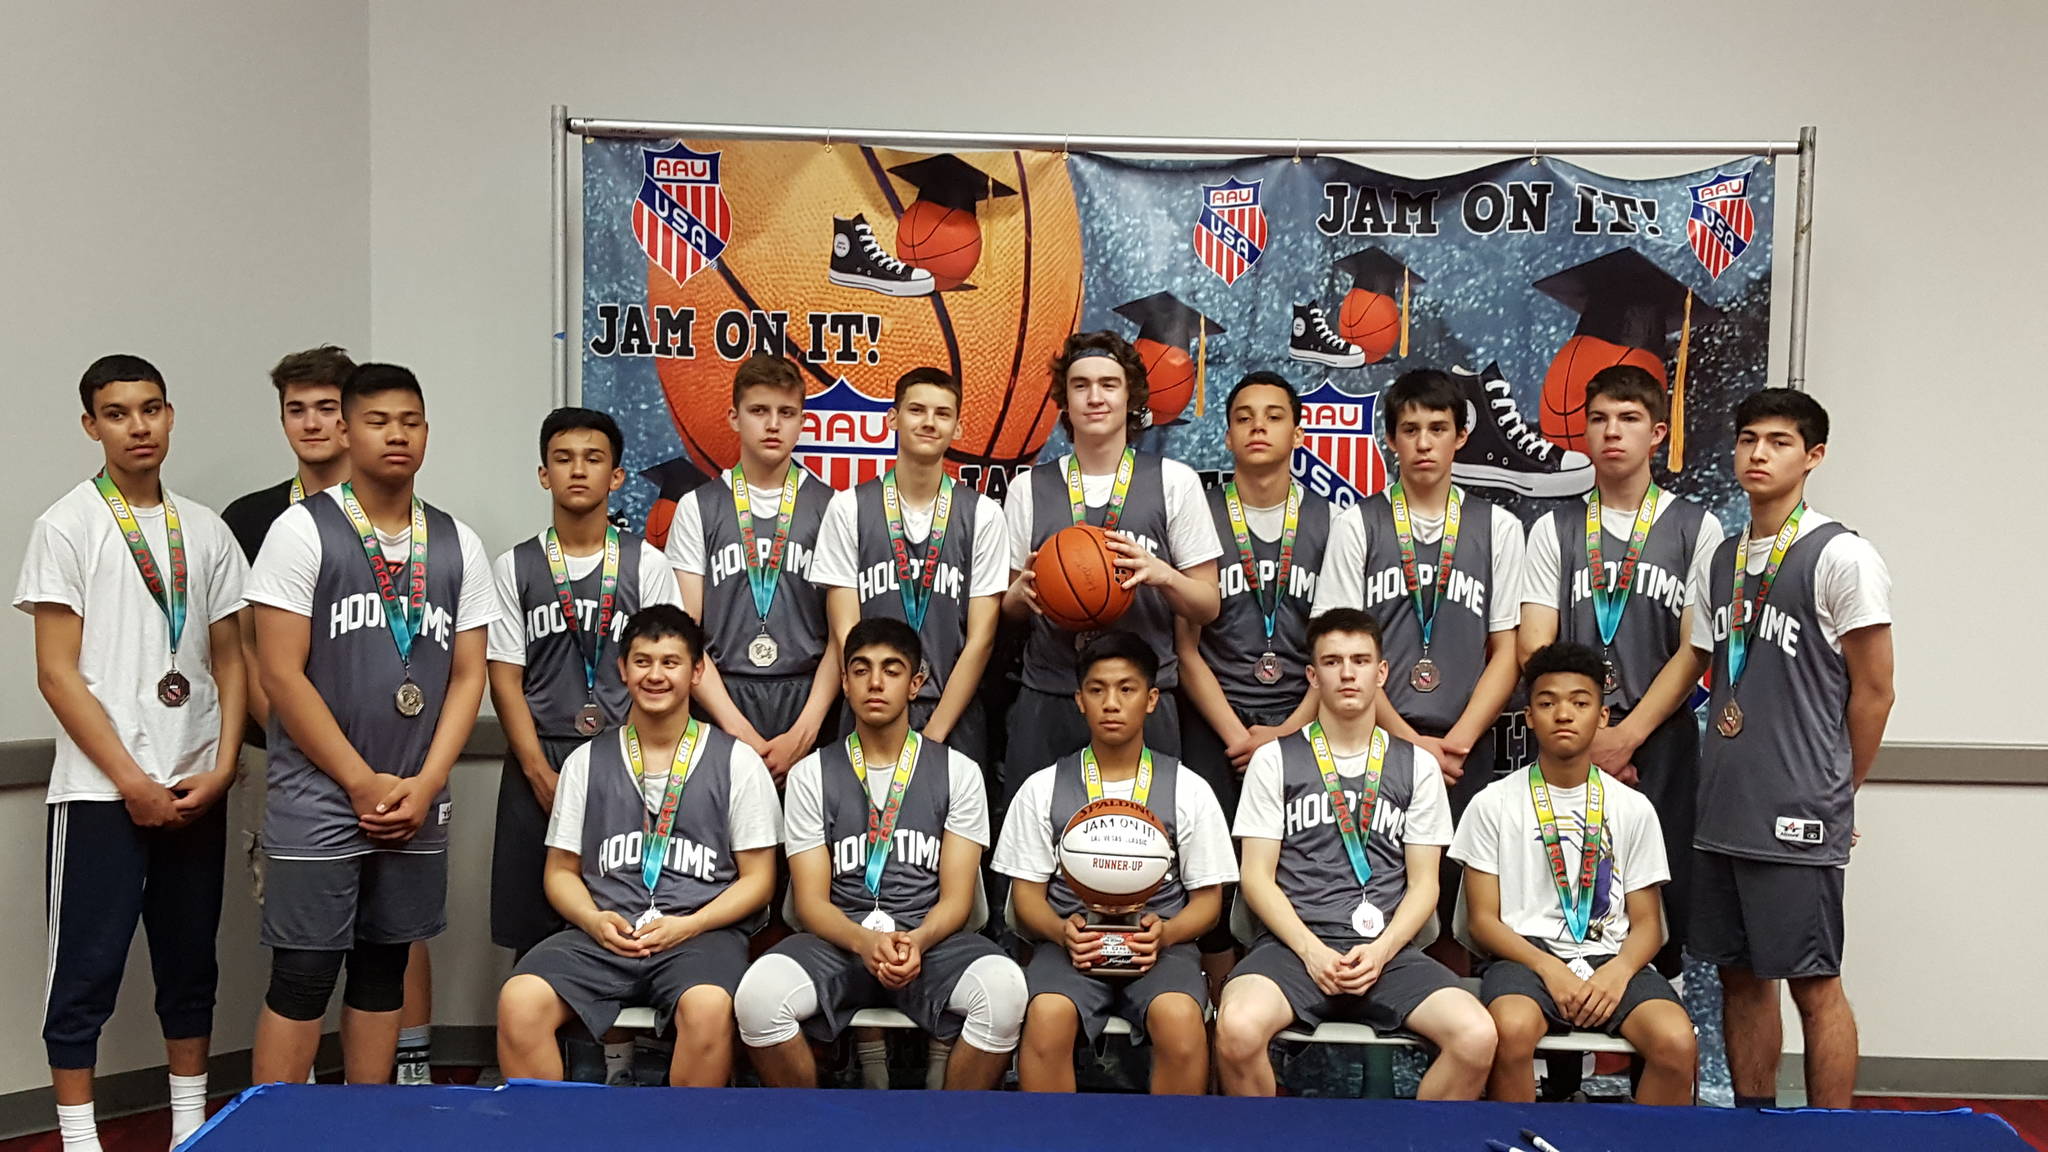 The Juneau HoopTime high school basketball team poses with their second place trophy in the 10th grade division at the Las Vegas Classic. (Photo courtesy of Jeff Jenkins)